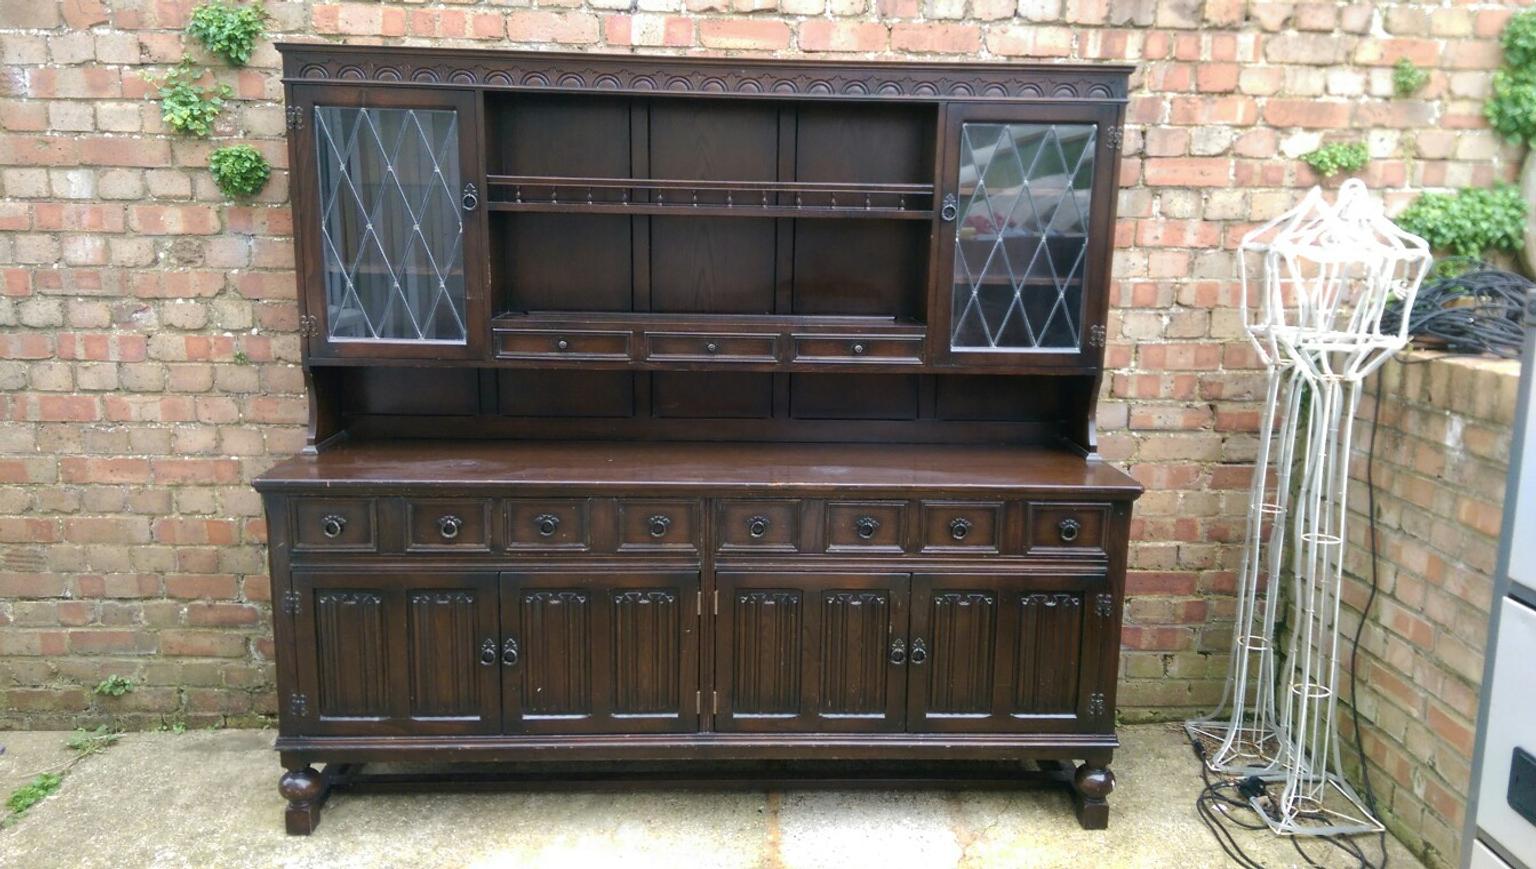 Very Large Welsh Dresser Solid Oak In Bn1 Brighton For 100 00 For